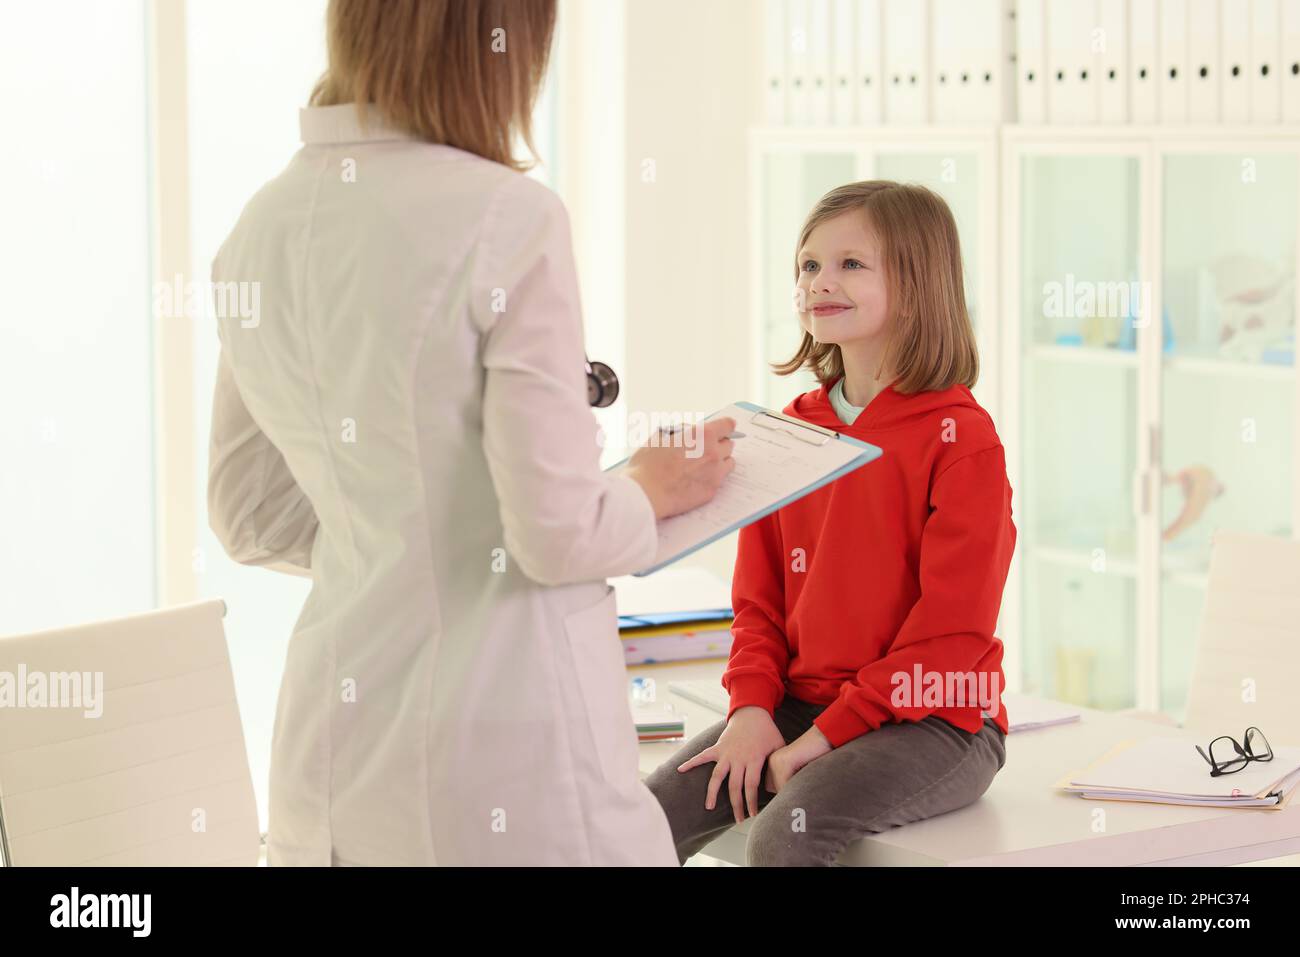 Doctor with clipboard examines little girl in hospital Stock Photo